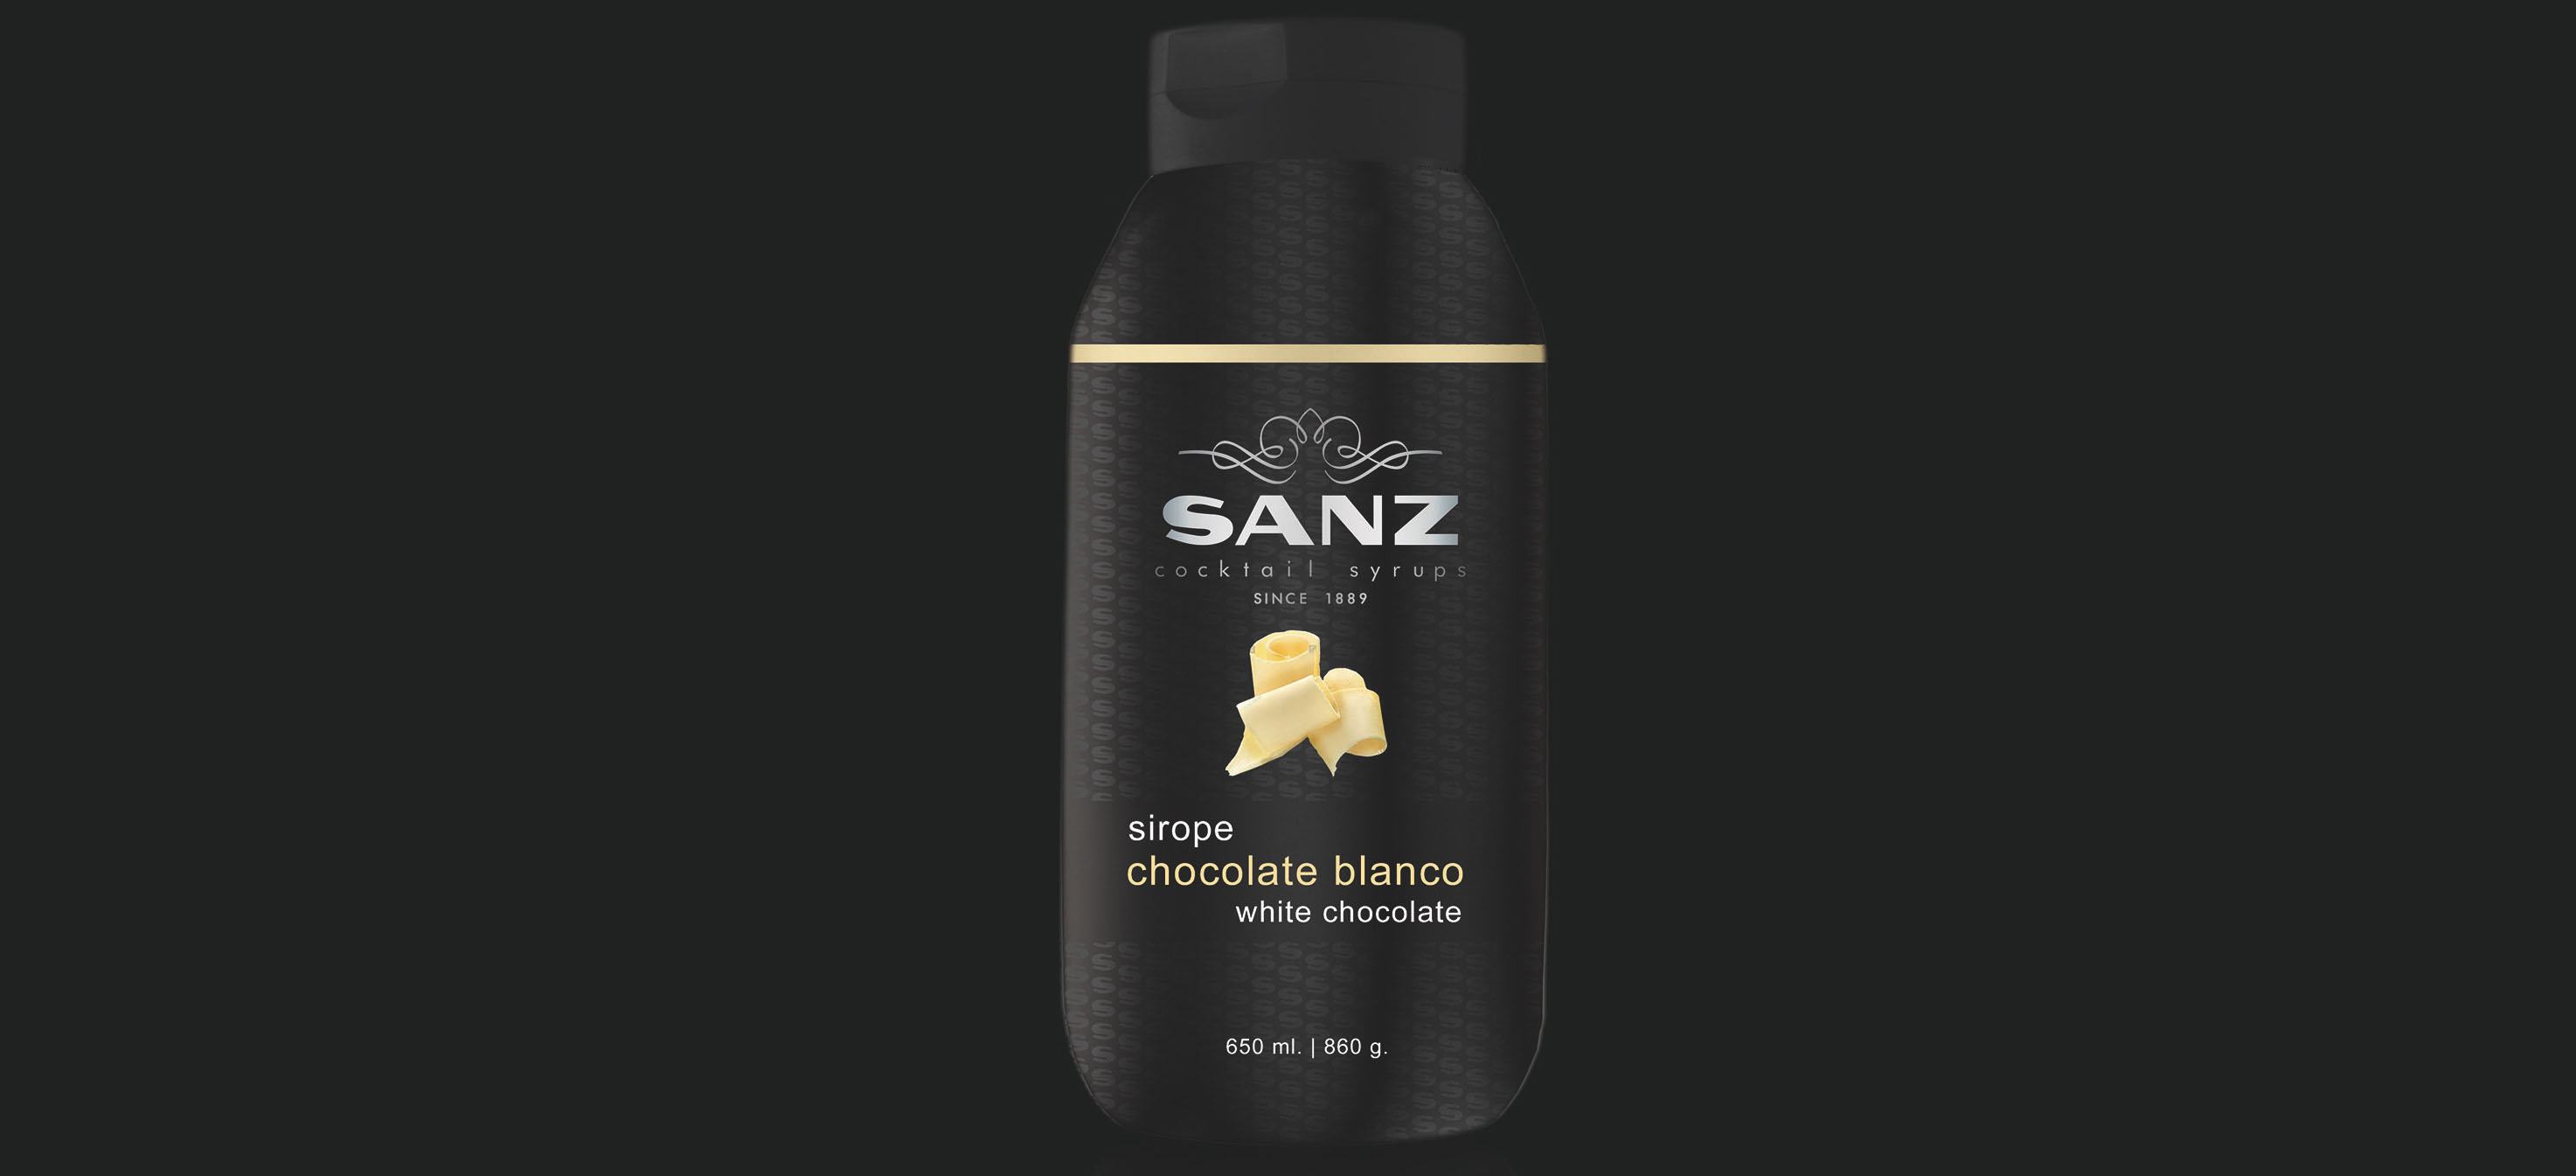 WHITE CHOCOLATE SYRUP, THE NEW SANZ SYRUP FLAVOUR.